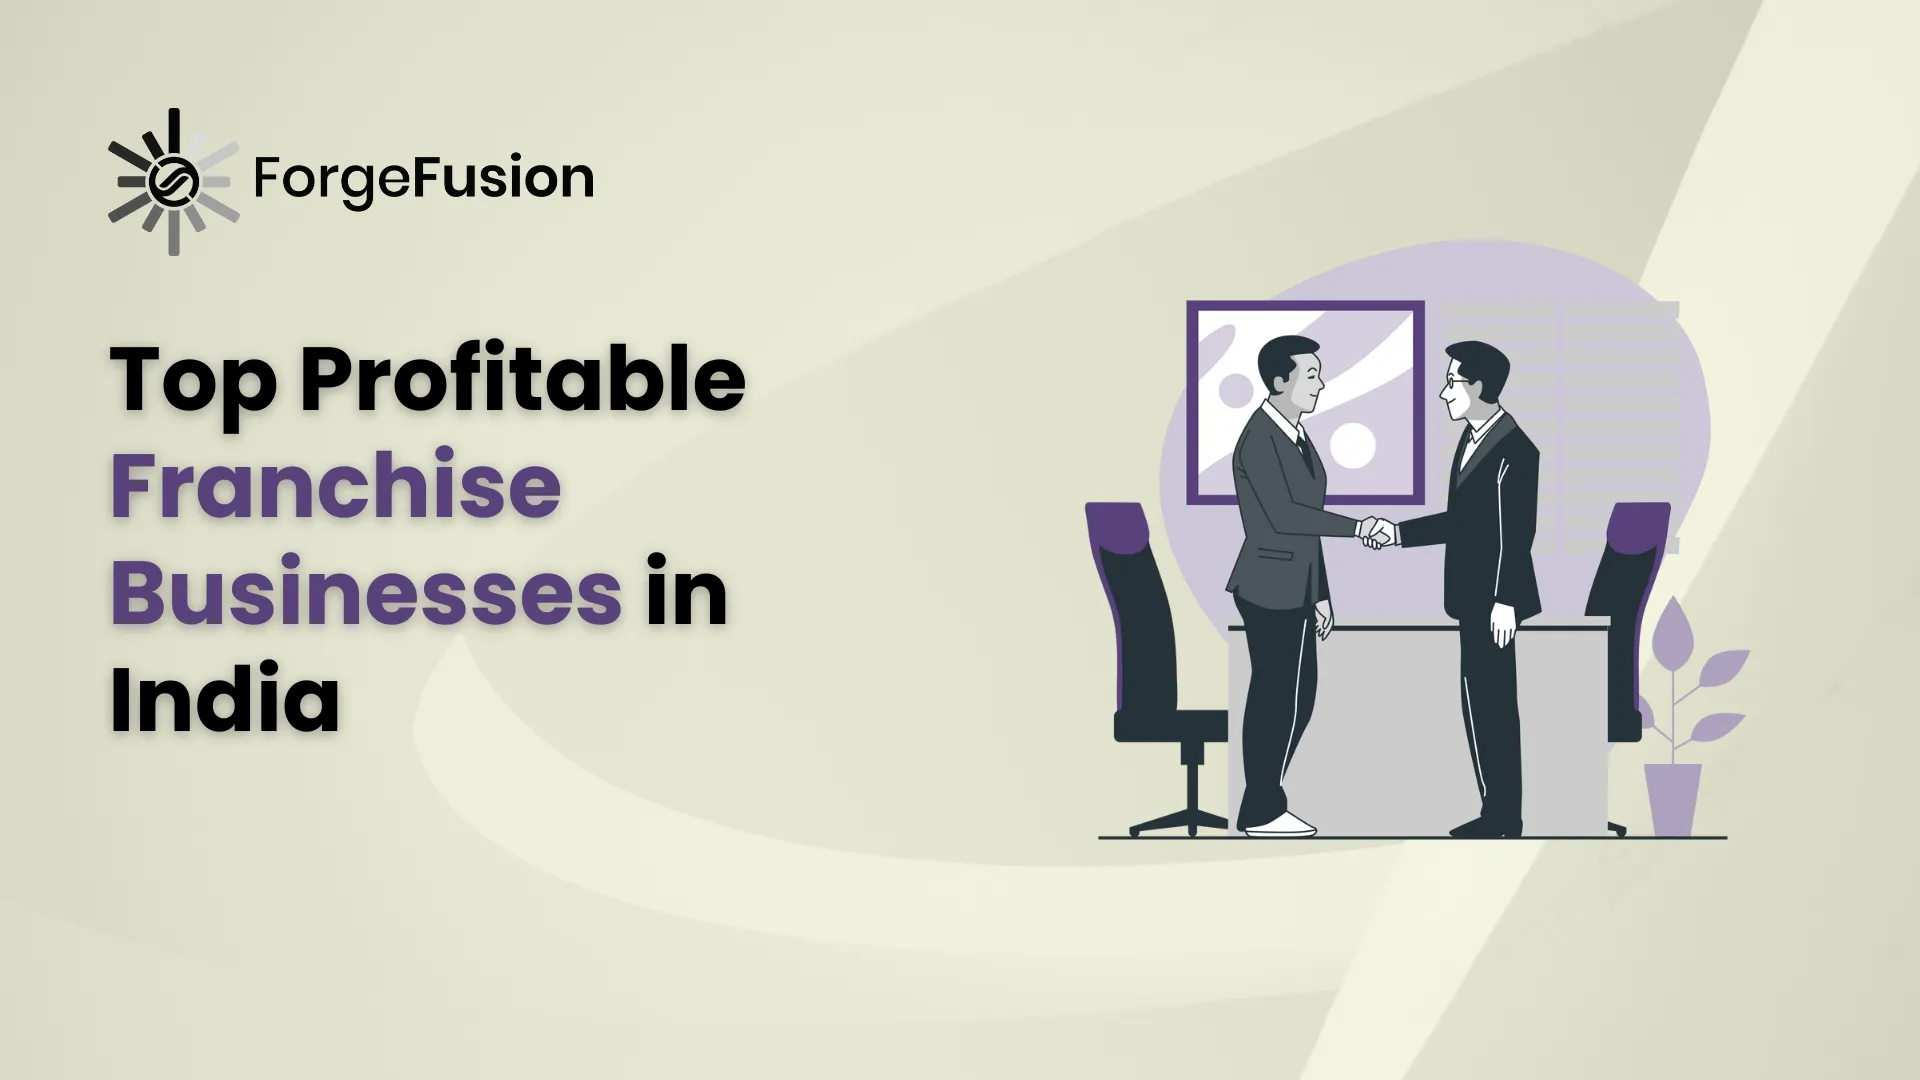 Top 10 profitable franchise businesses in India